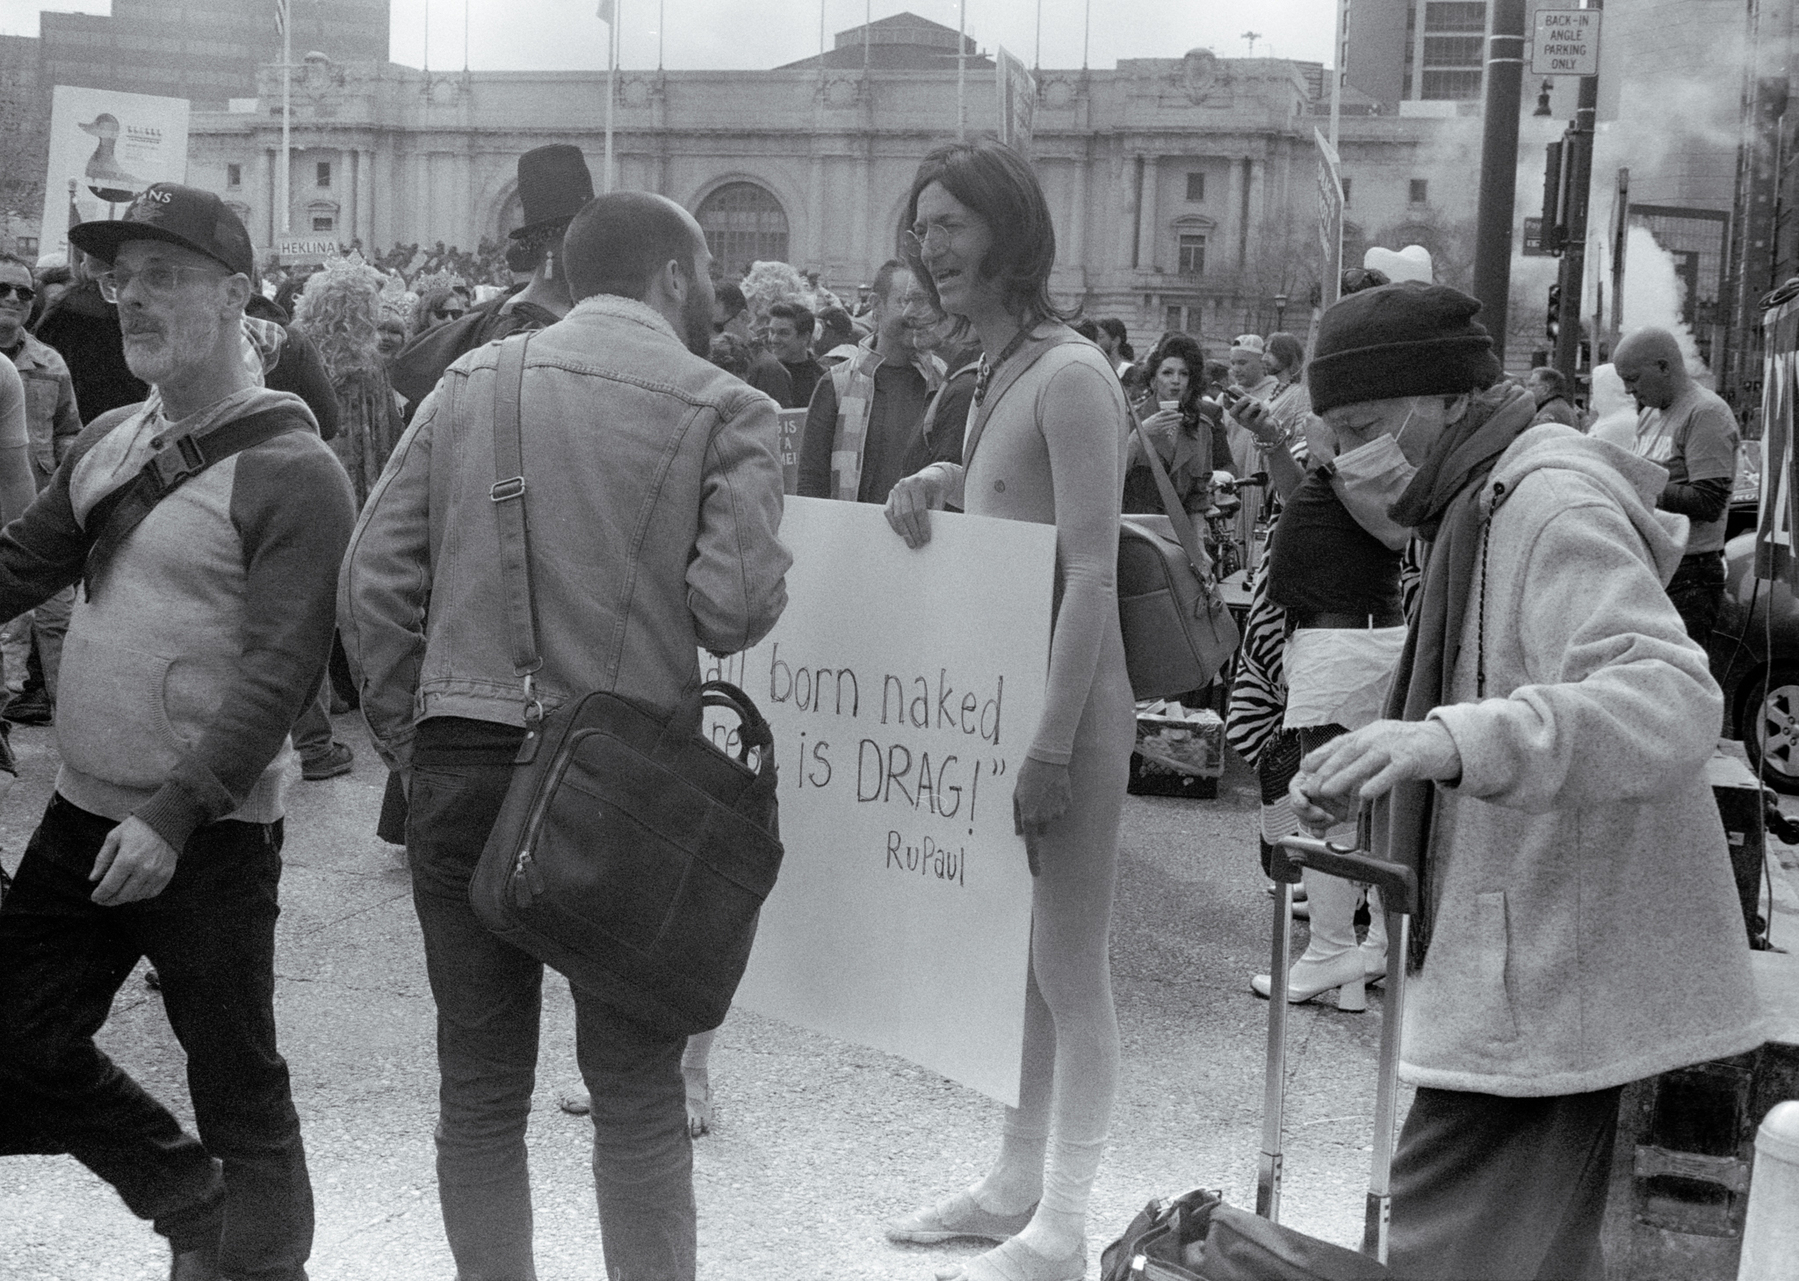 a scan of a black and white photo showing a person being interviewed, holding a sign that says Being Born Naked is a DRAG, a quote from Rupal